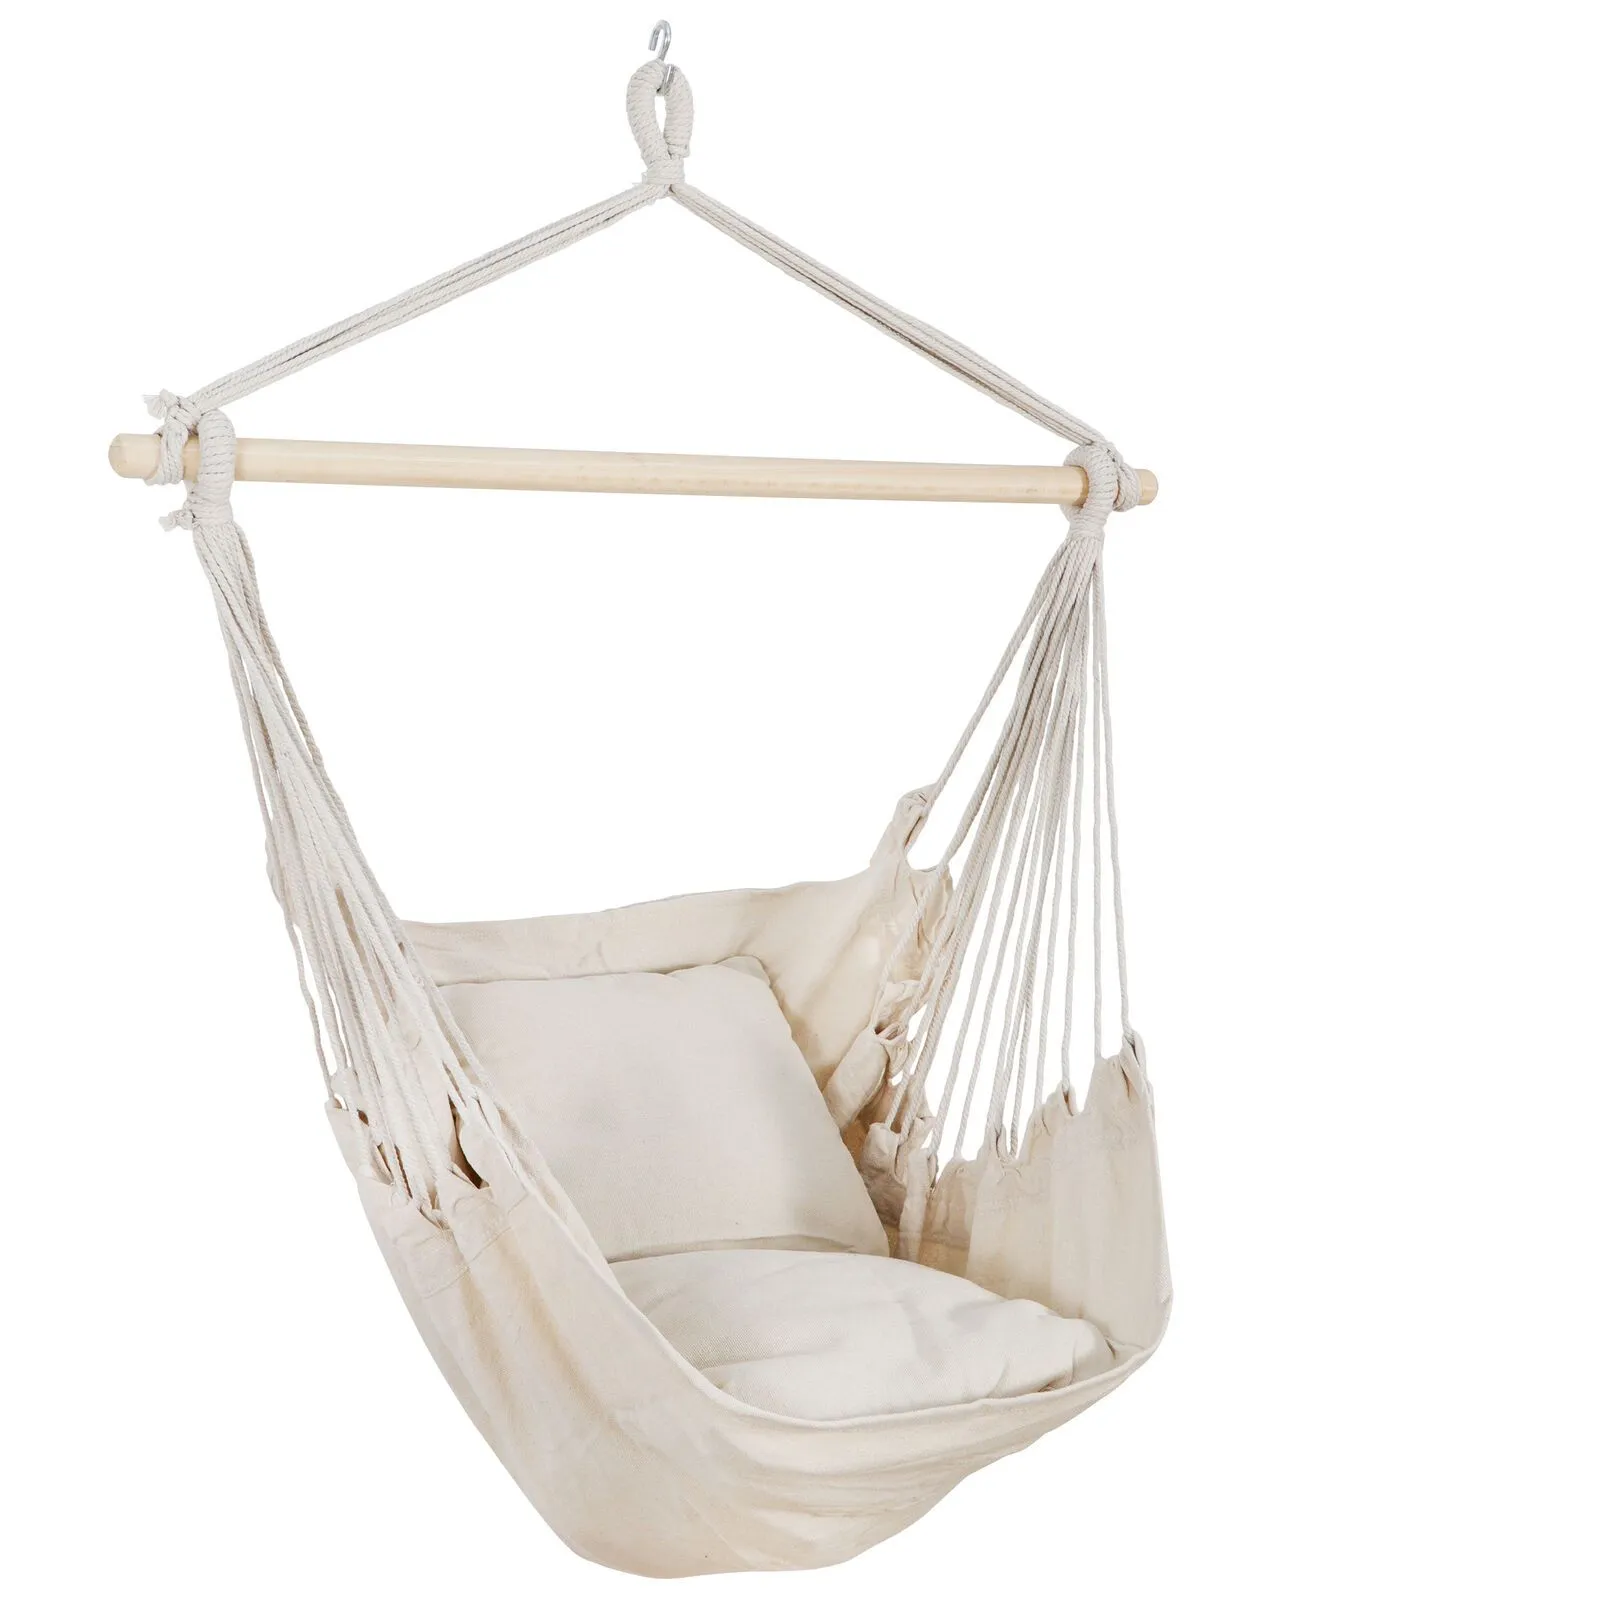 Hammock Hanging Chair Air Deluxe Sky Swing Outdoor Rope Chair Solid Wood 320lbs